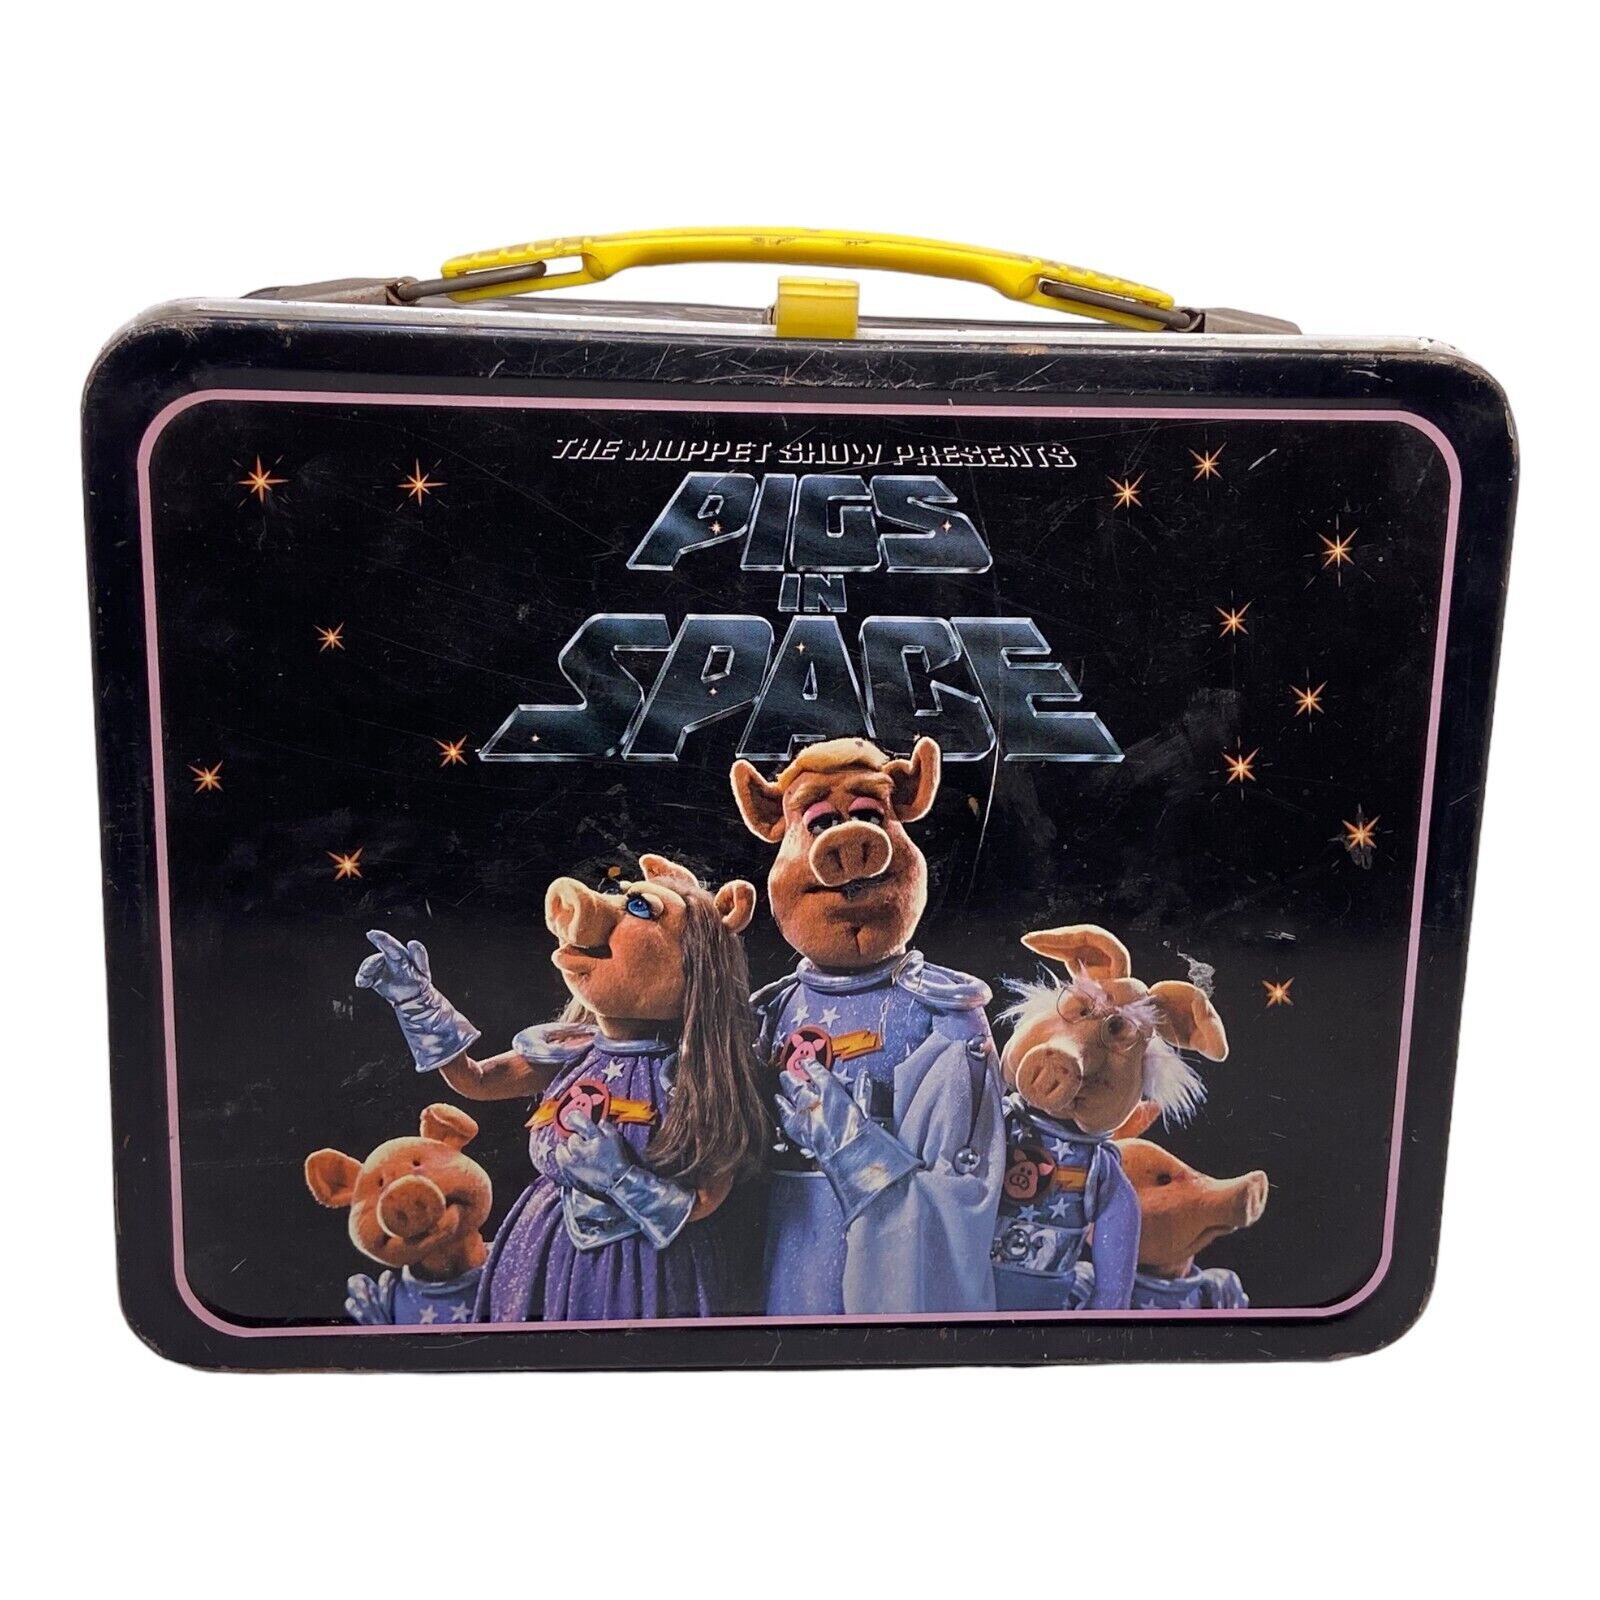 🐞 Vintage Metal Lunchbox Pigs In Space Jim Henson 1977 muppet show NO THERMOS